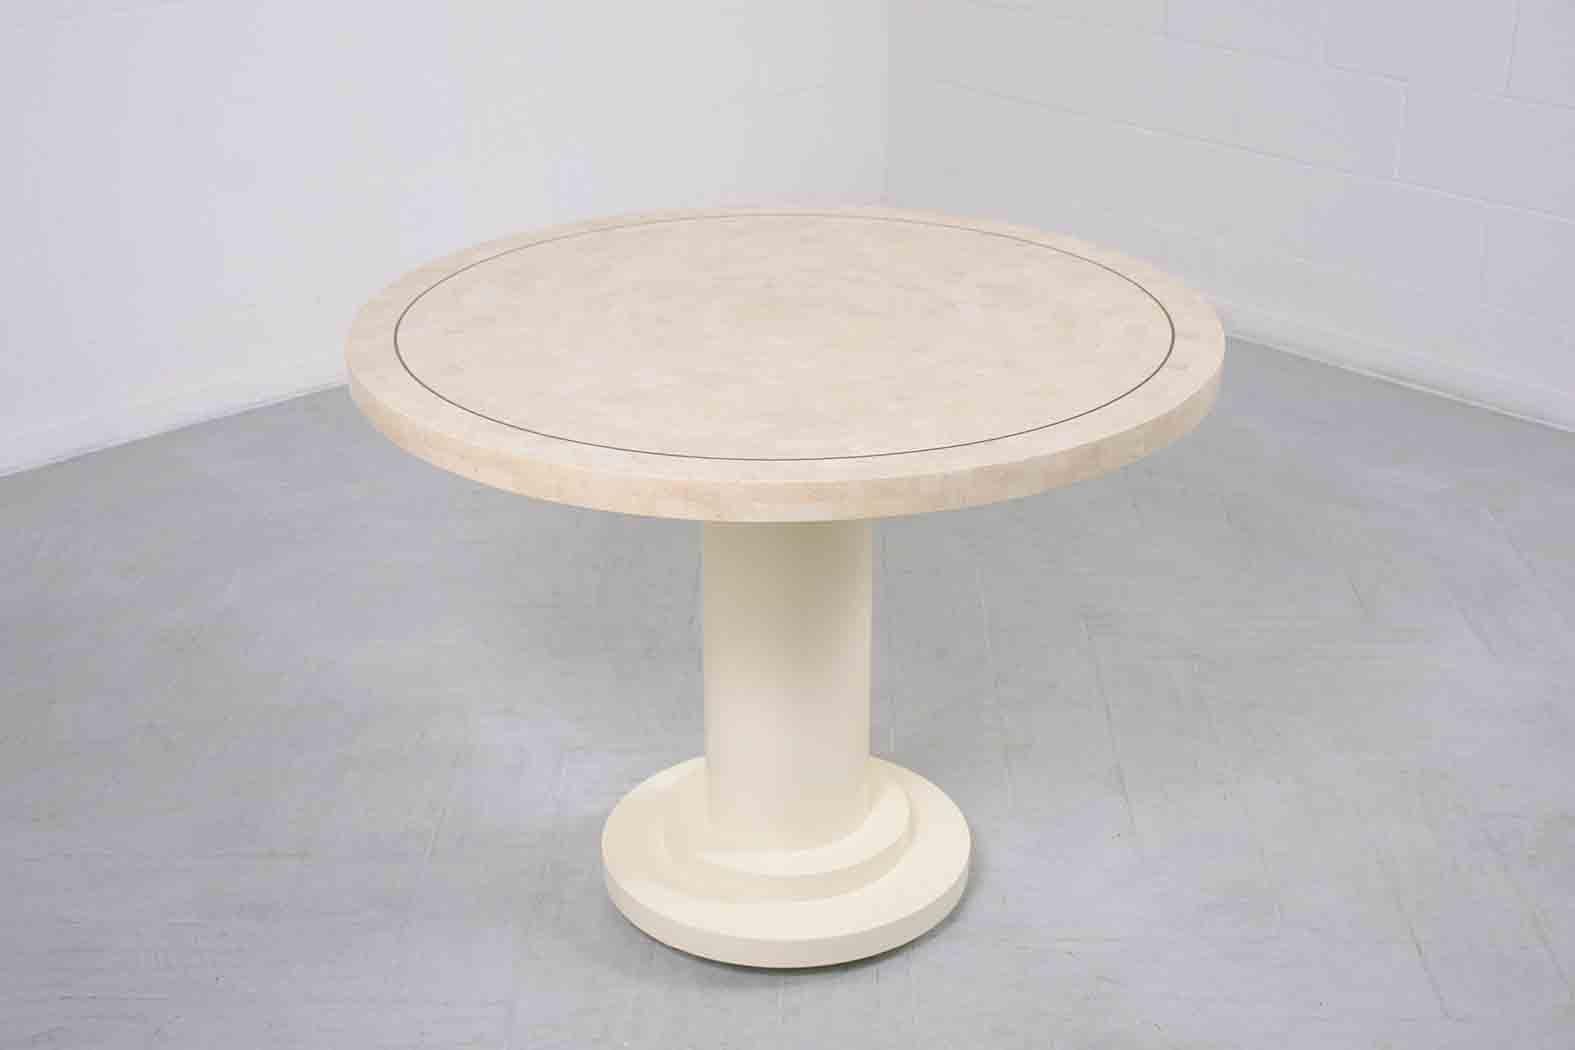 Mid-20th Century Restored 1960s Round Stone Inlaid Pedestal Dining Table with Brass Molding